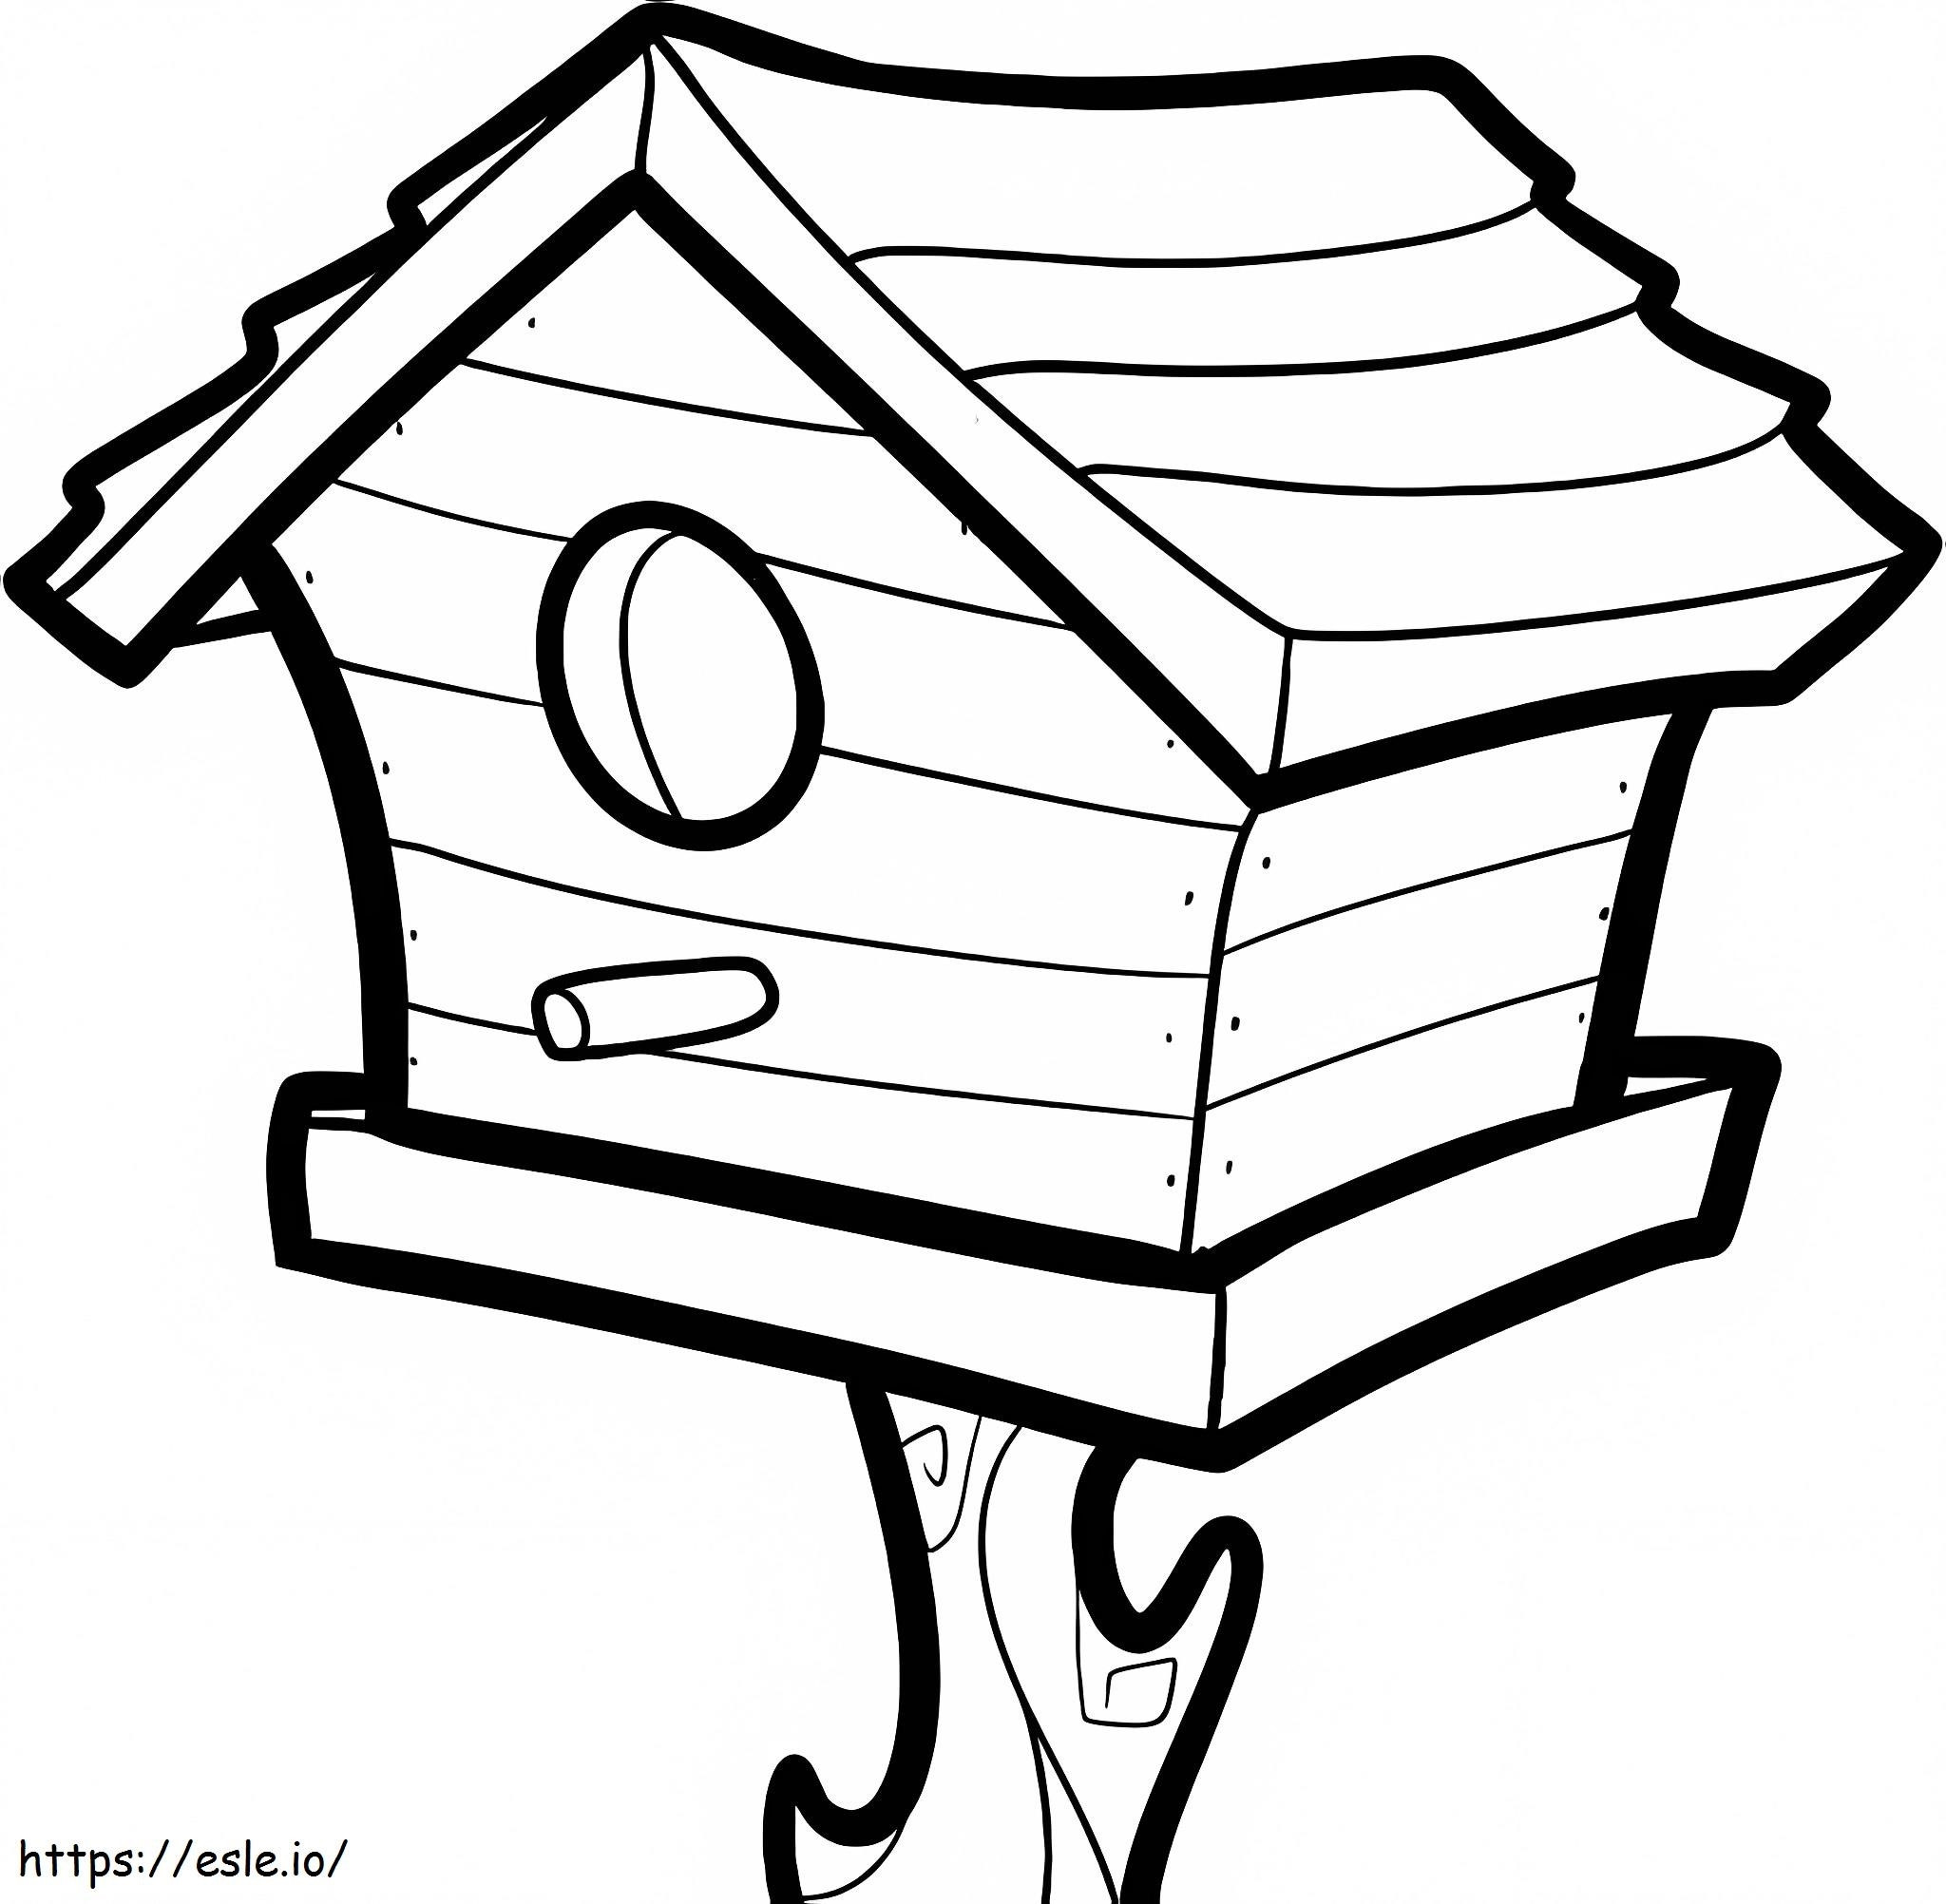 Wooden Bird House coloring page